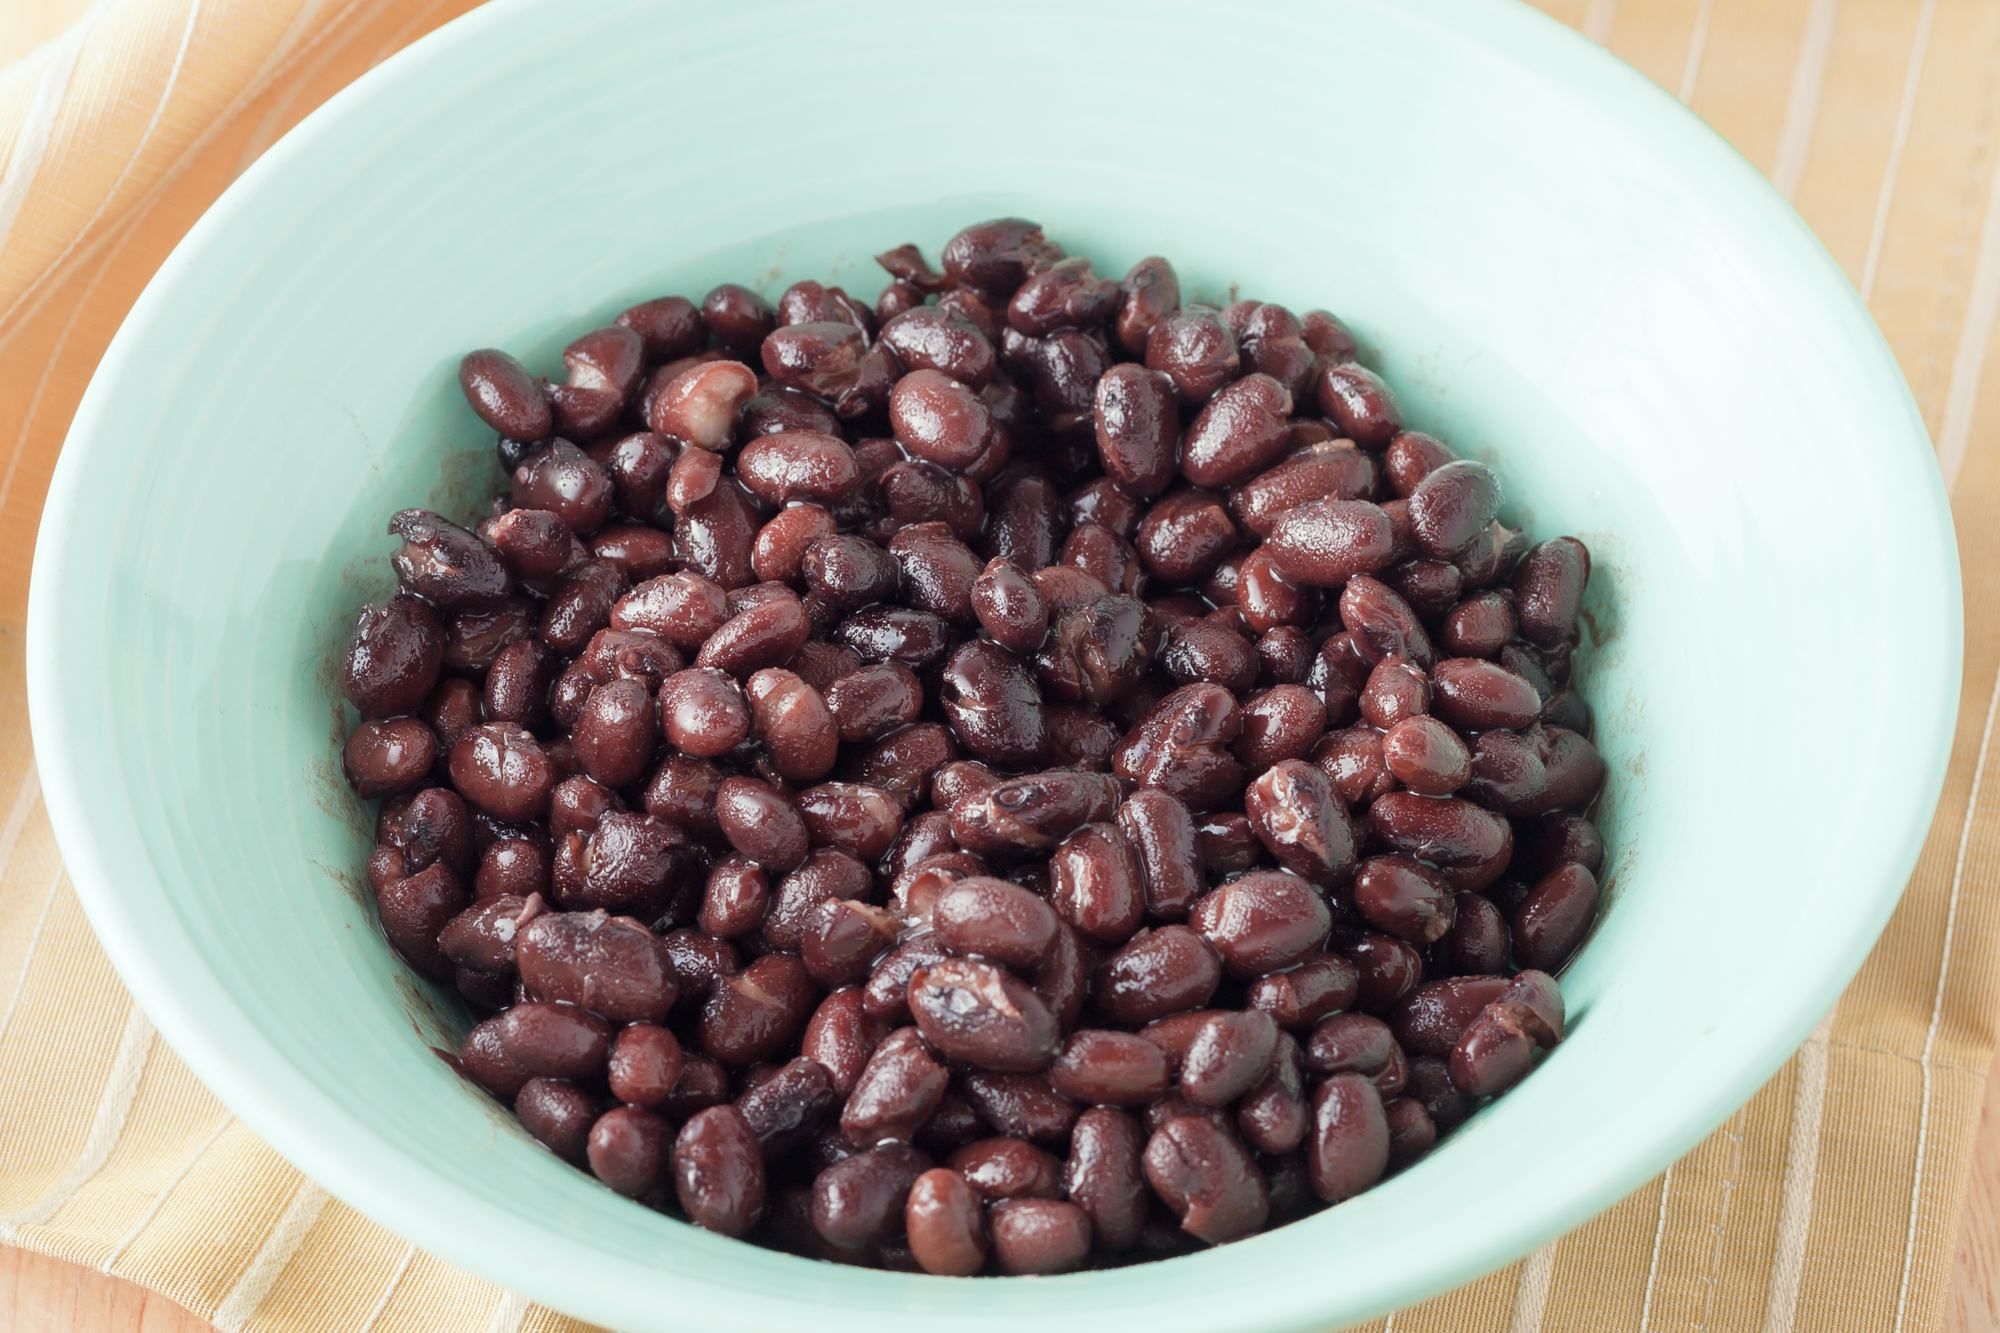 Costco Warns That Bad Seal on S&W Organic Black Beans May Lead to Botulism